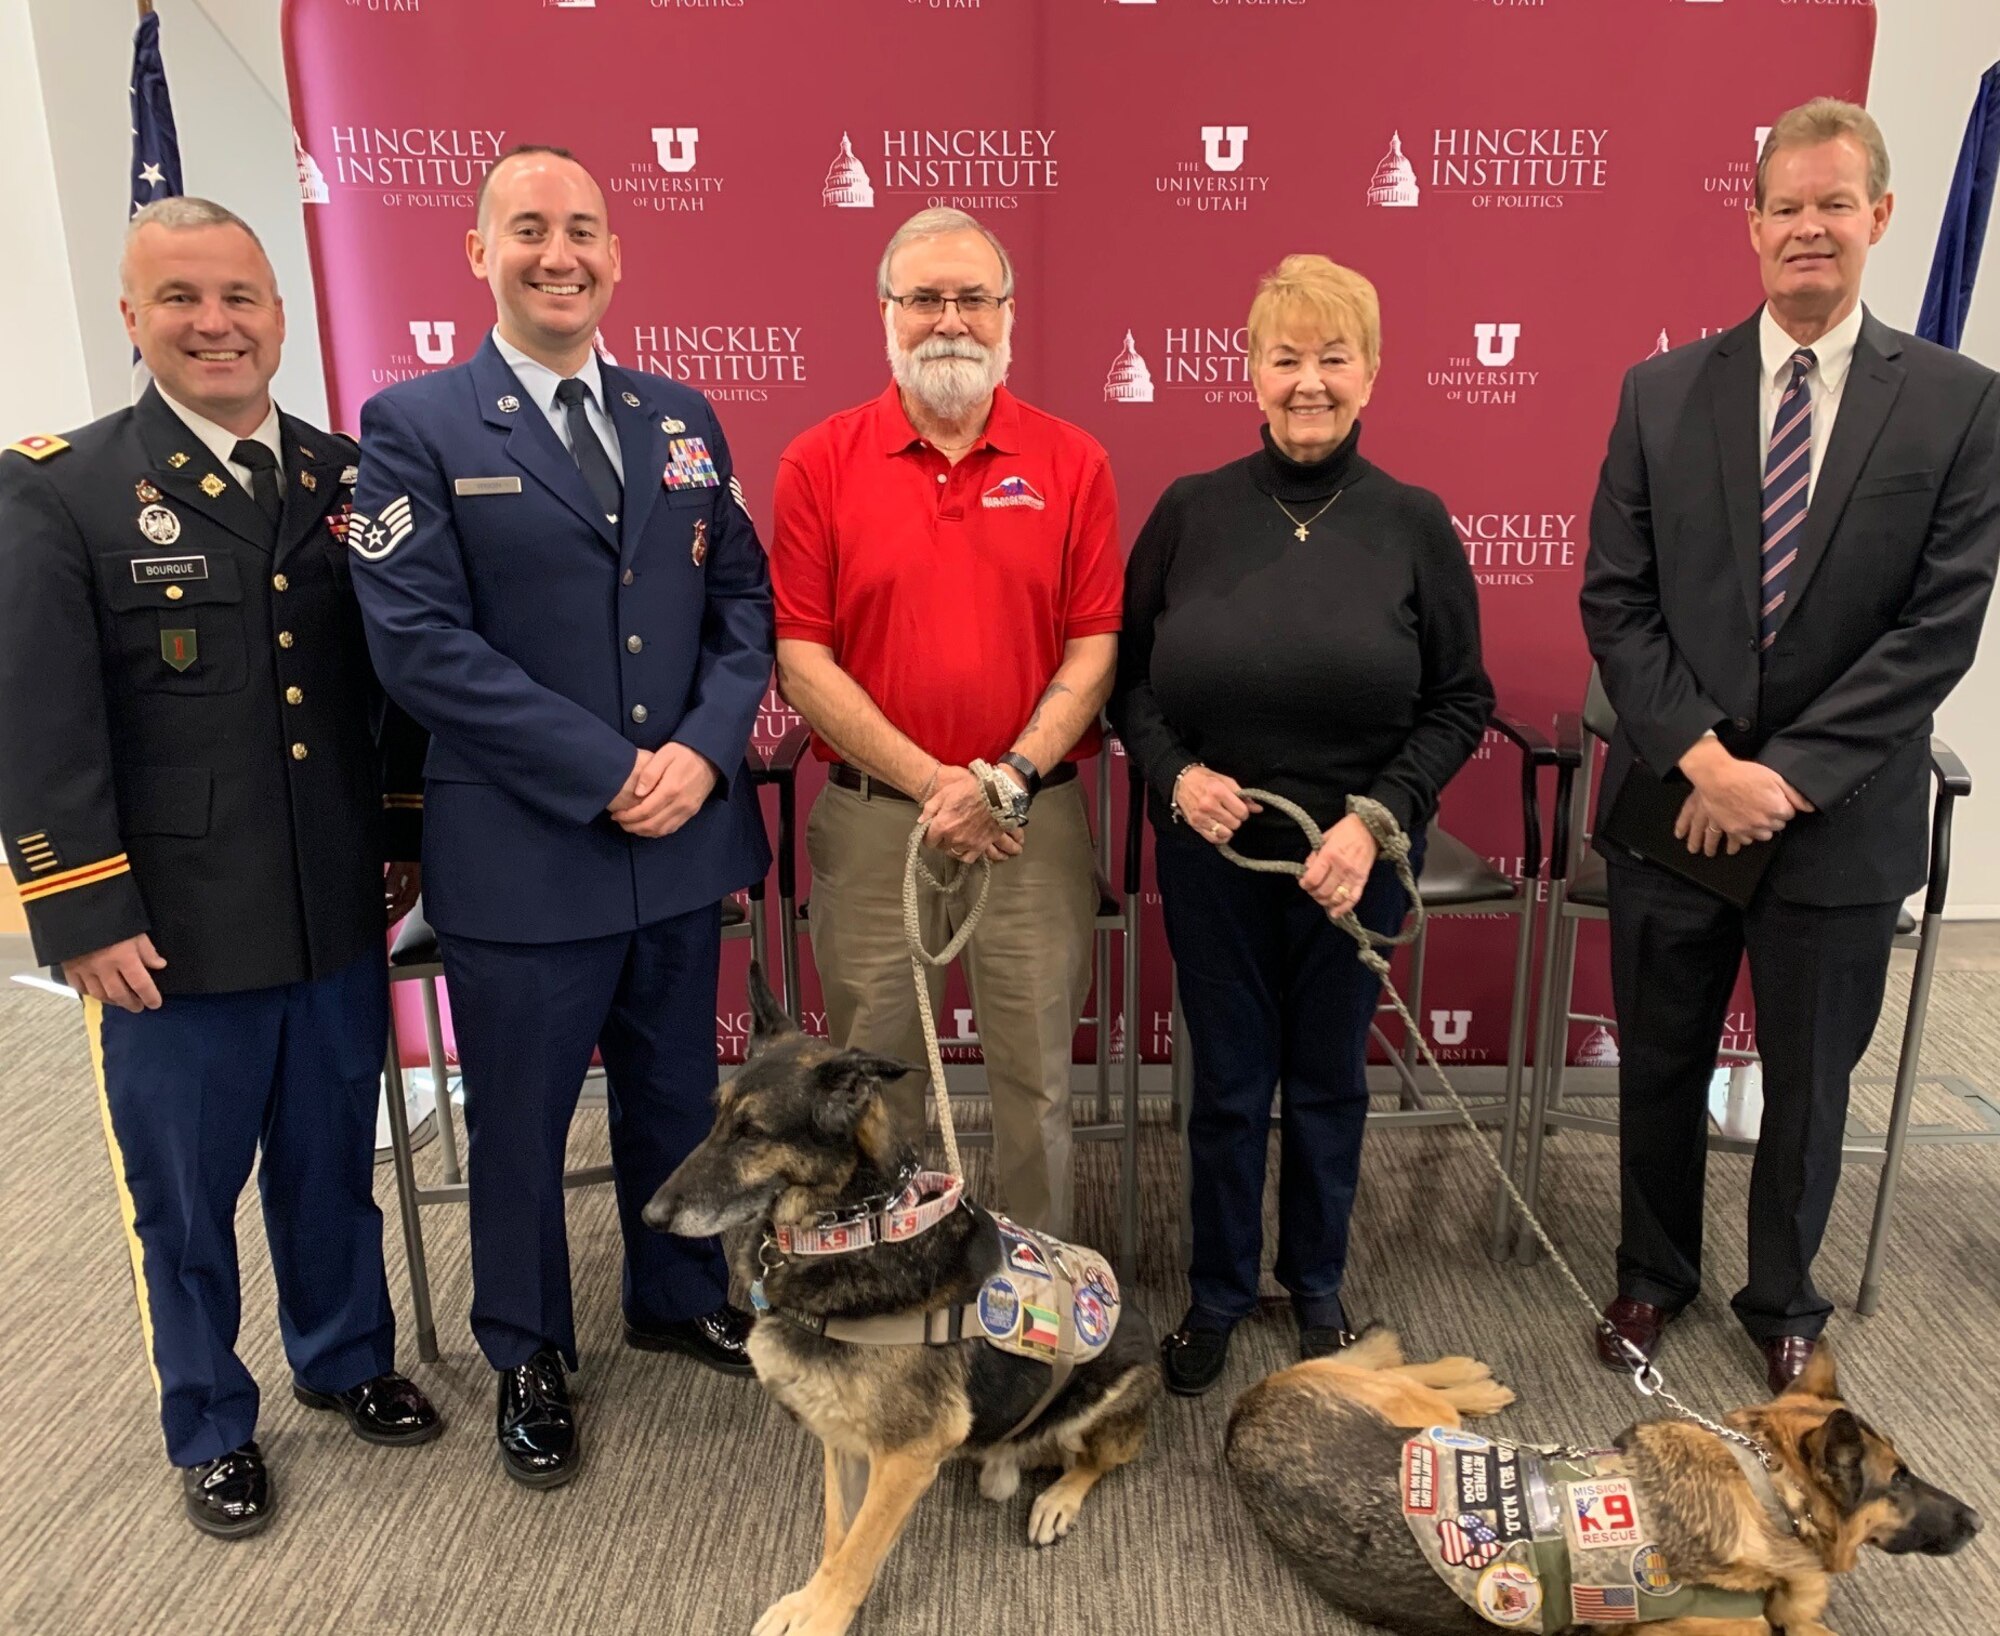 Five panelists and two military working dogs pose in front of a red University of Utah Hinckley Institute for Politics backdrop.